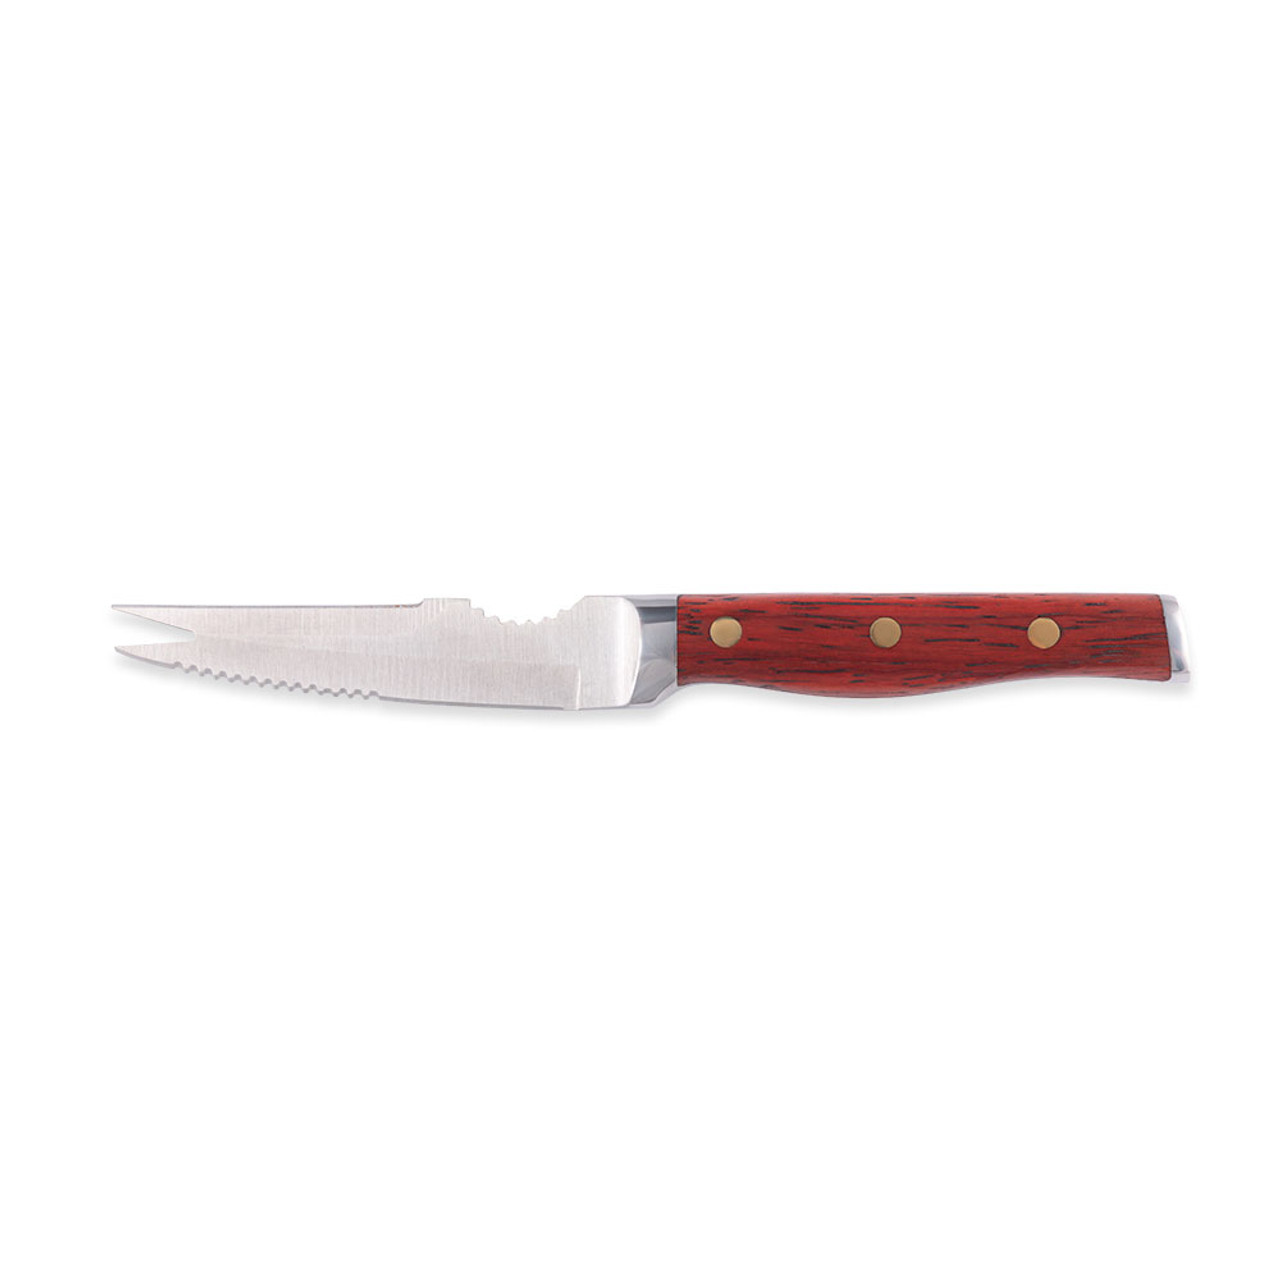 Urban Bar Coley Pronged Bar Knife - 18/8 Stainless Steel Blade